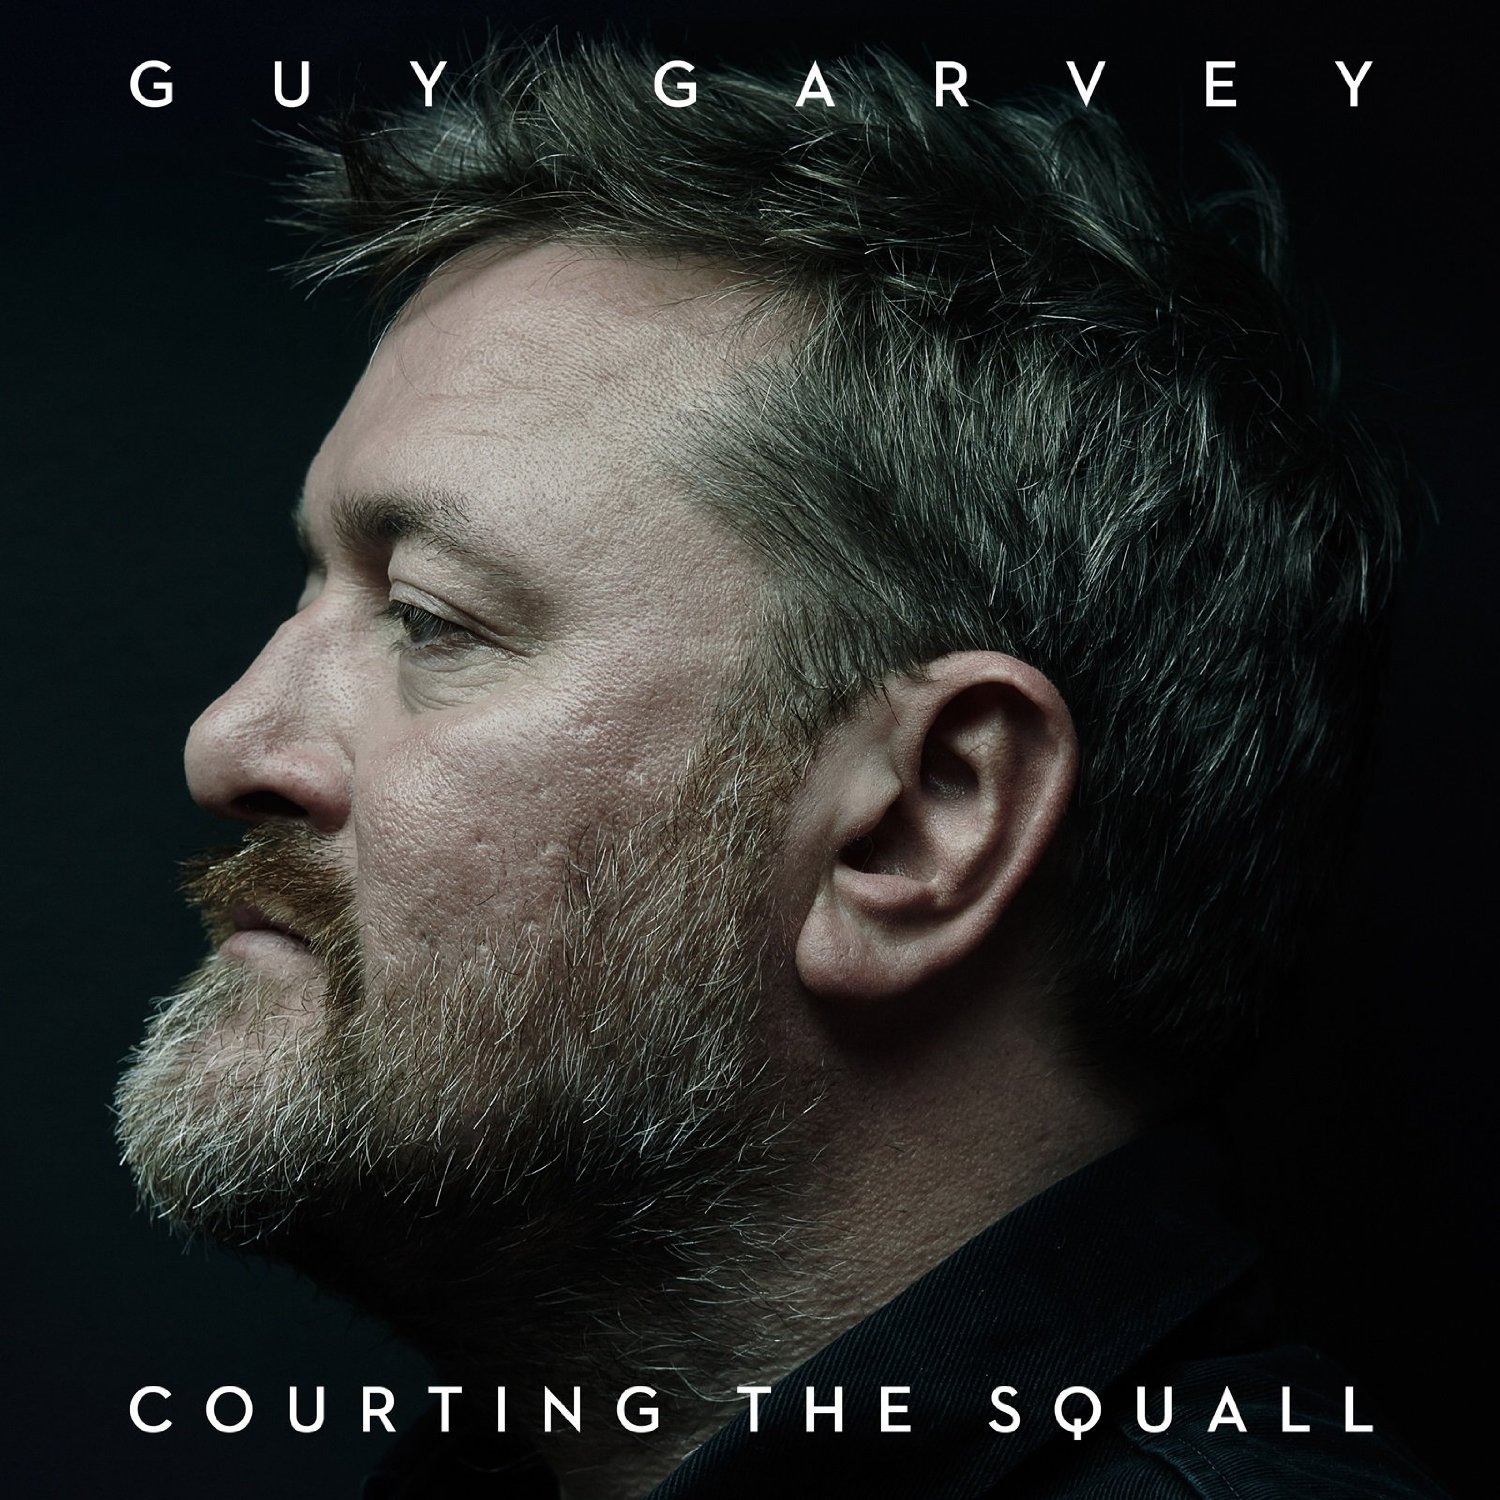 Guy Garvey - Courting The Squall (CD) (2015)